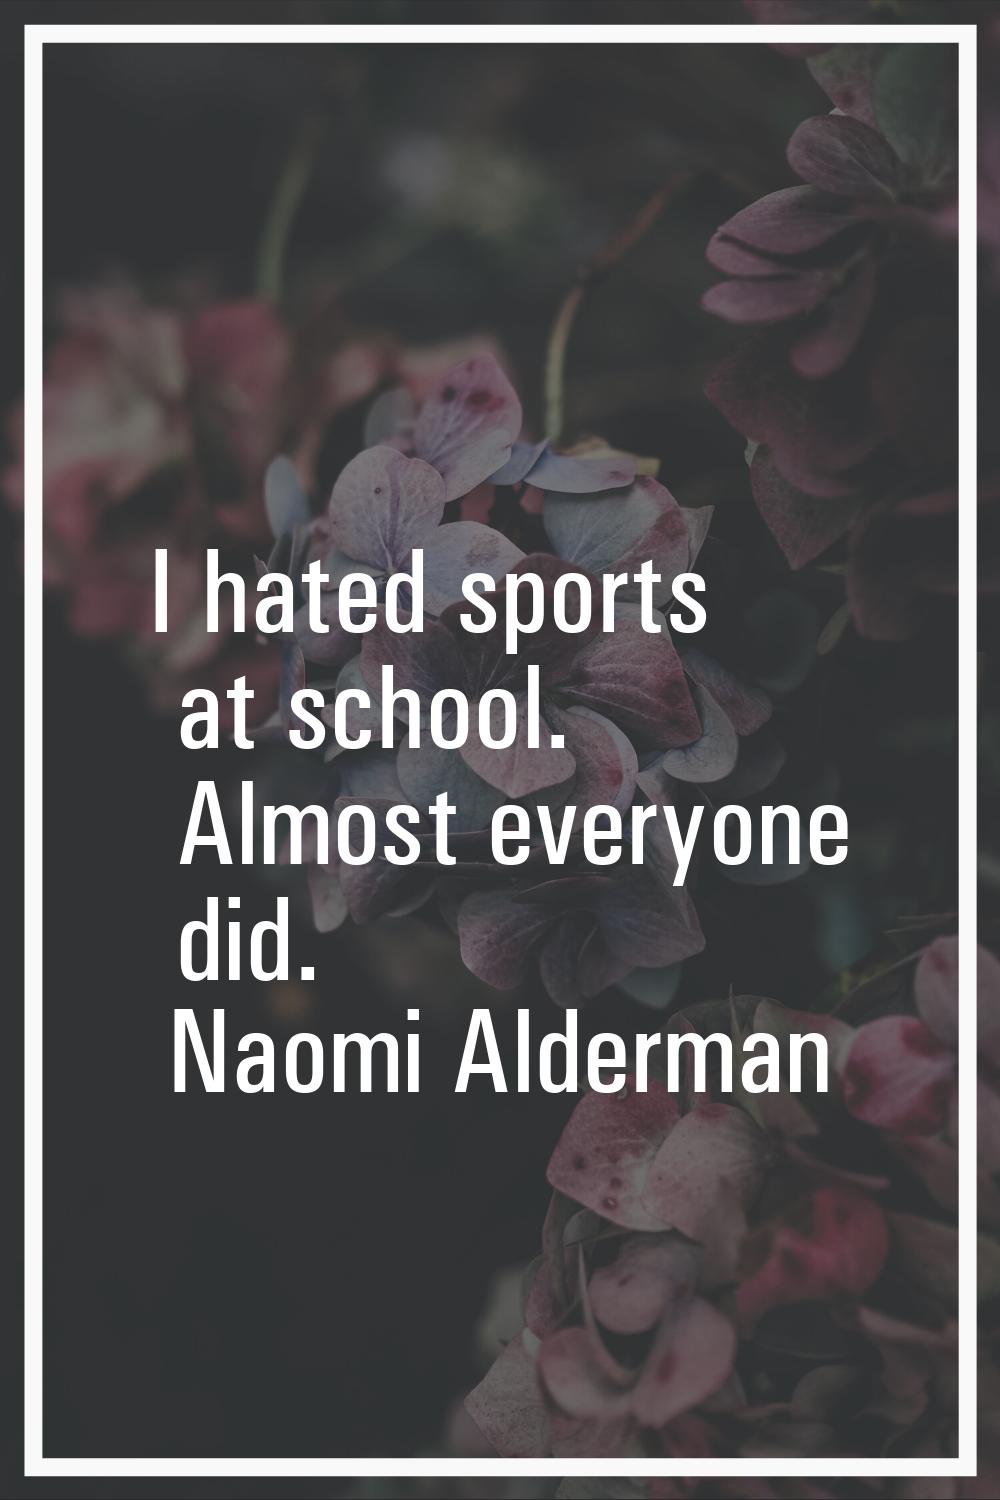 I hated sports at school. Almost everyone did.